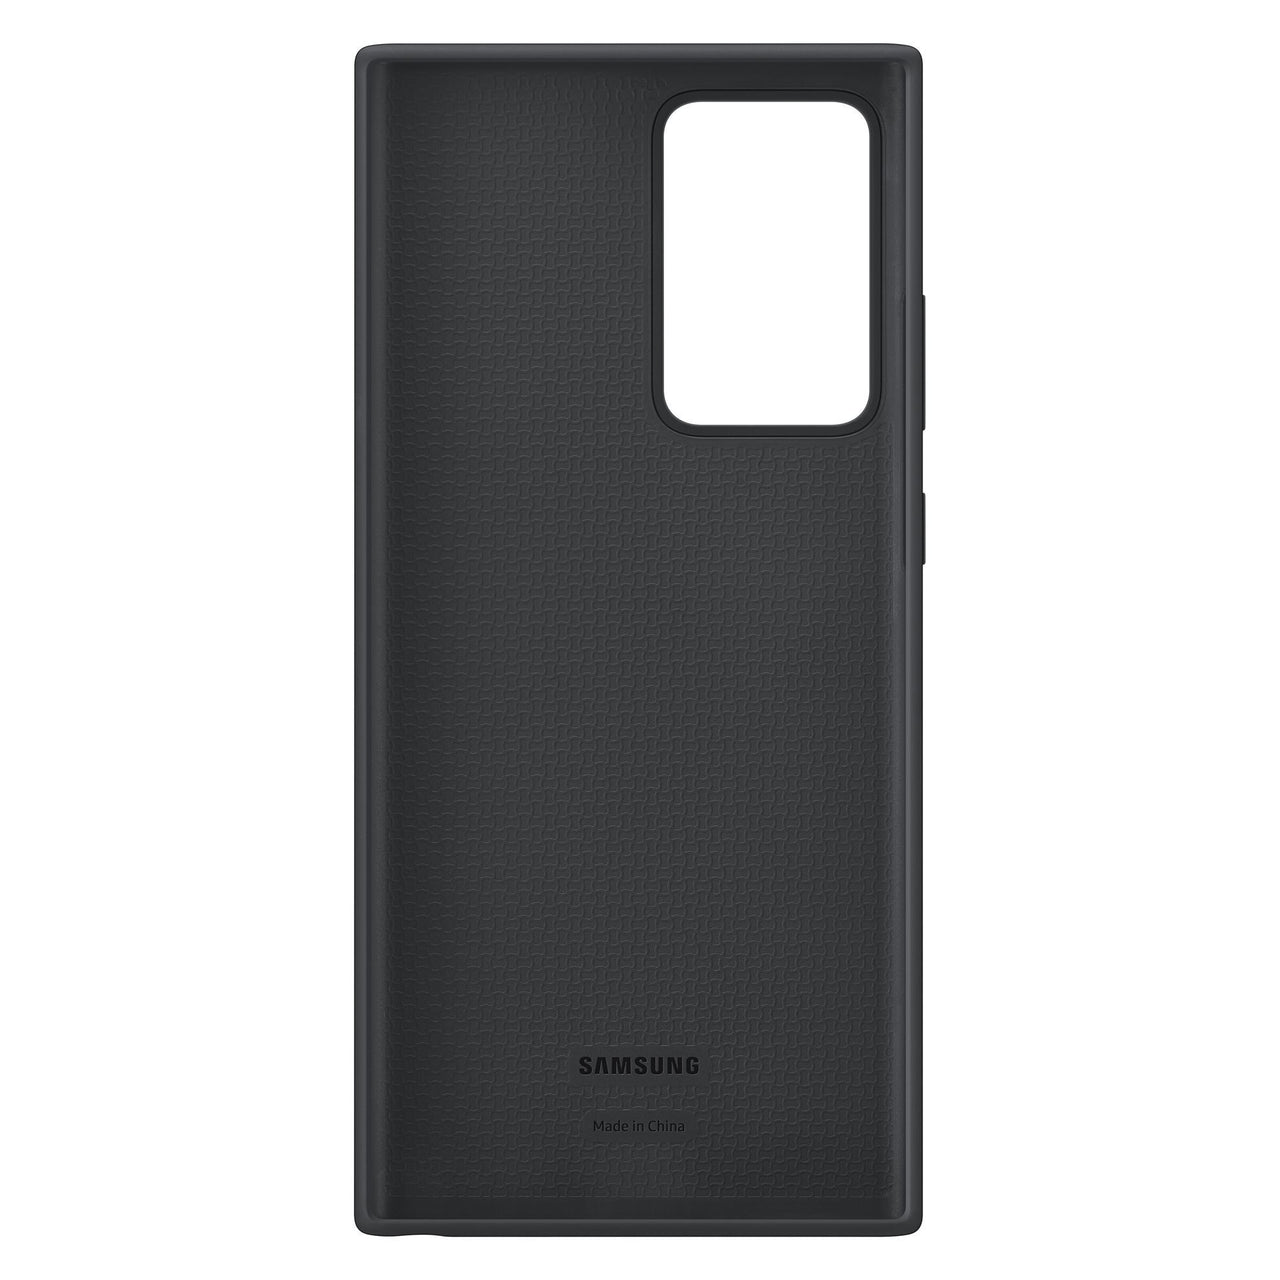 Samsung Silicone Cover for Galaxy Note20 Ultra - Black